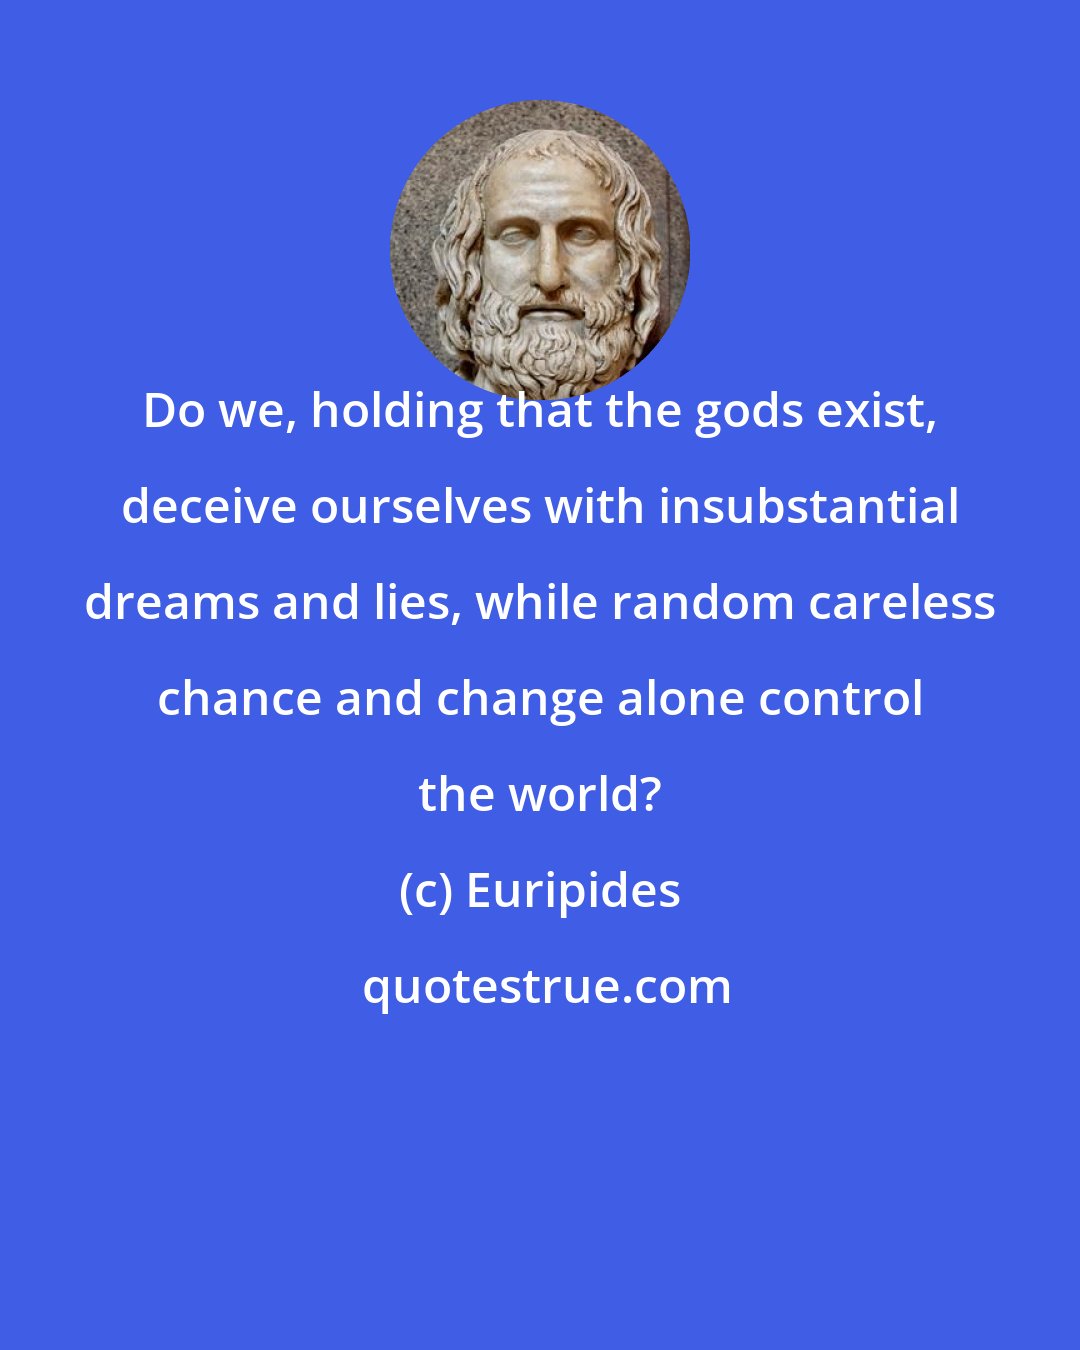 Euripides: Do we, holding that the gods exist, deceive ourselves with insubstantial dreams and lies, while random careless chance and change alone control the world?